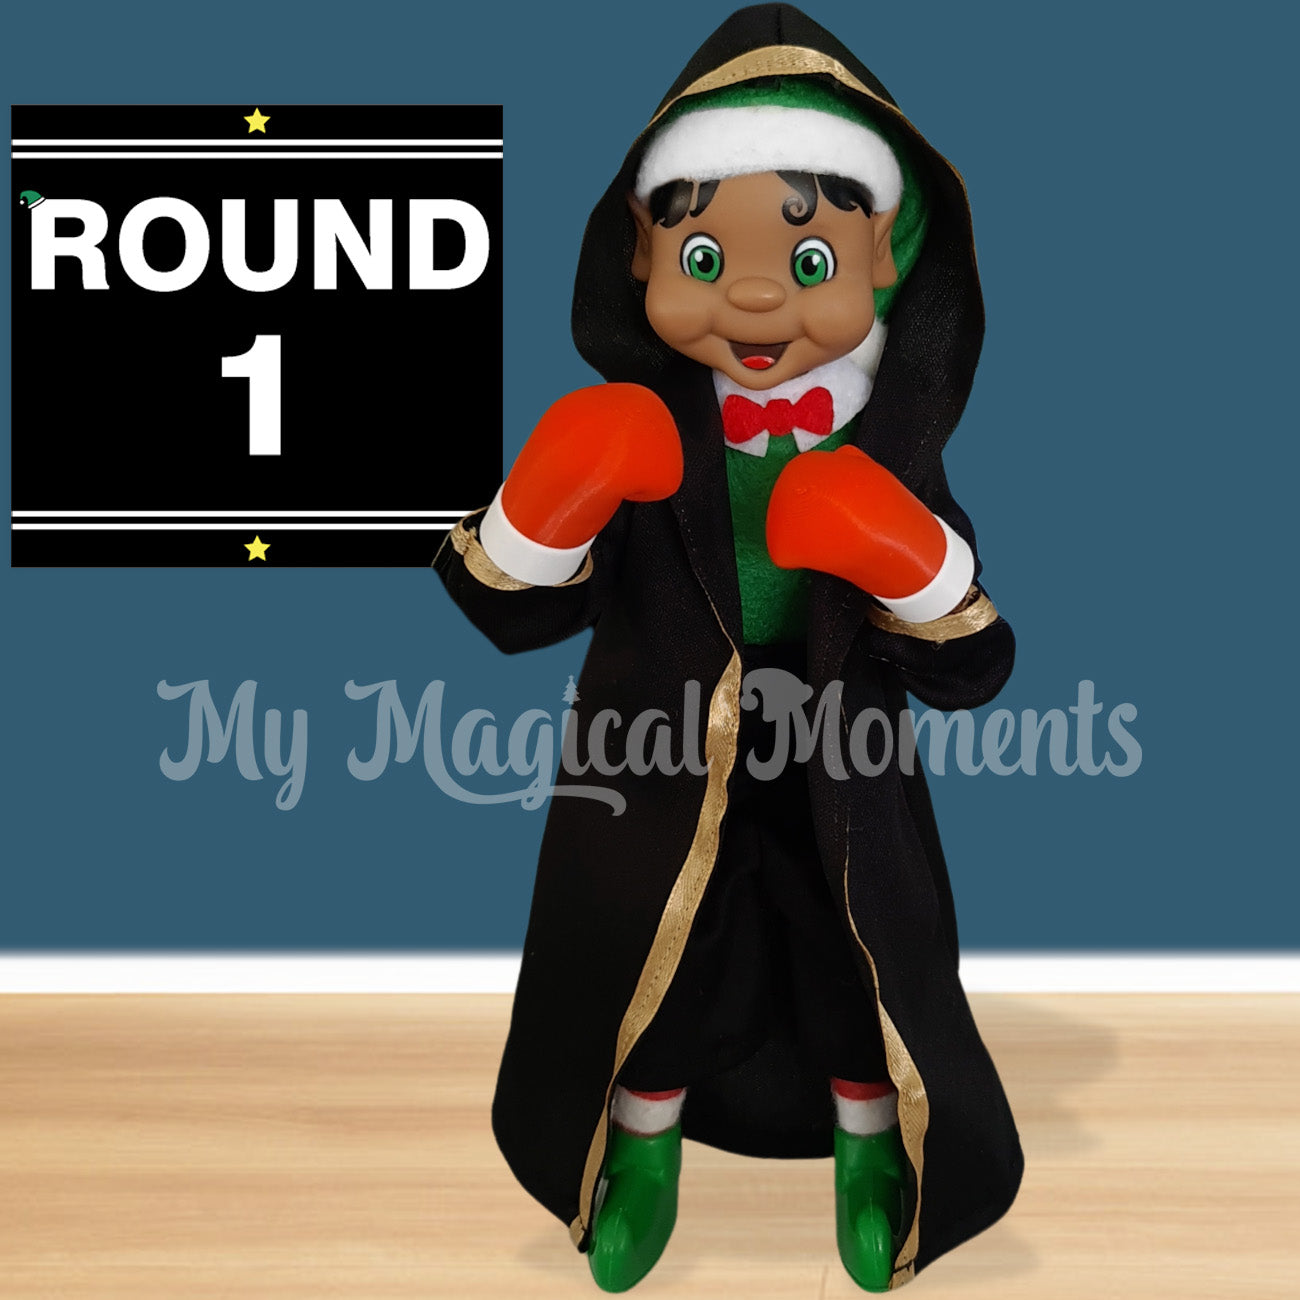 Black hair elf wearing a boxing outfit with red boxing gloves and a black robe